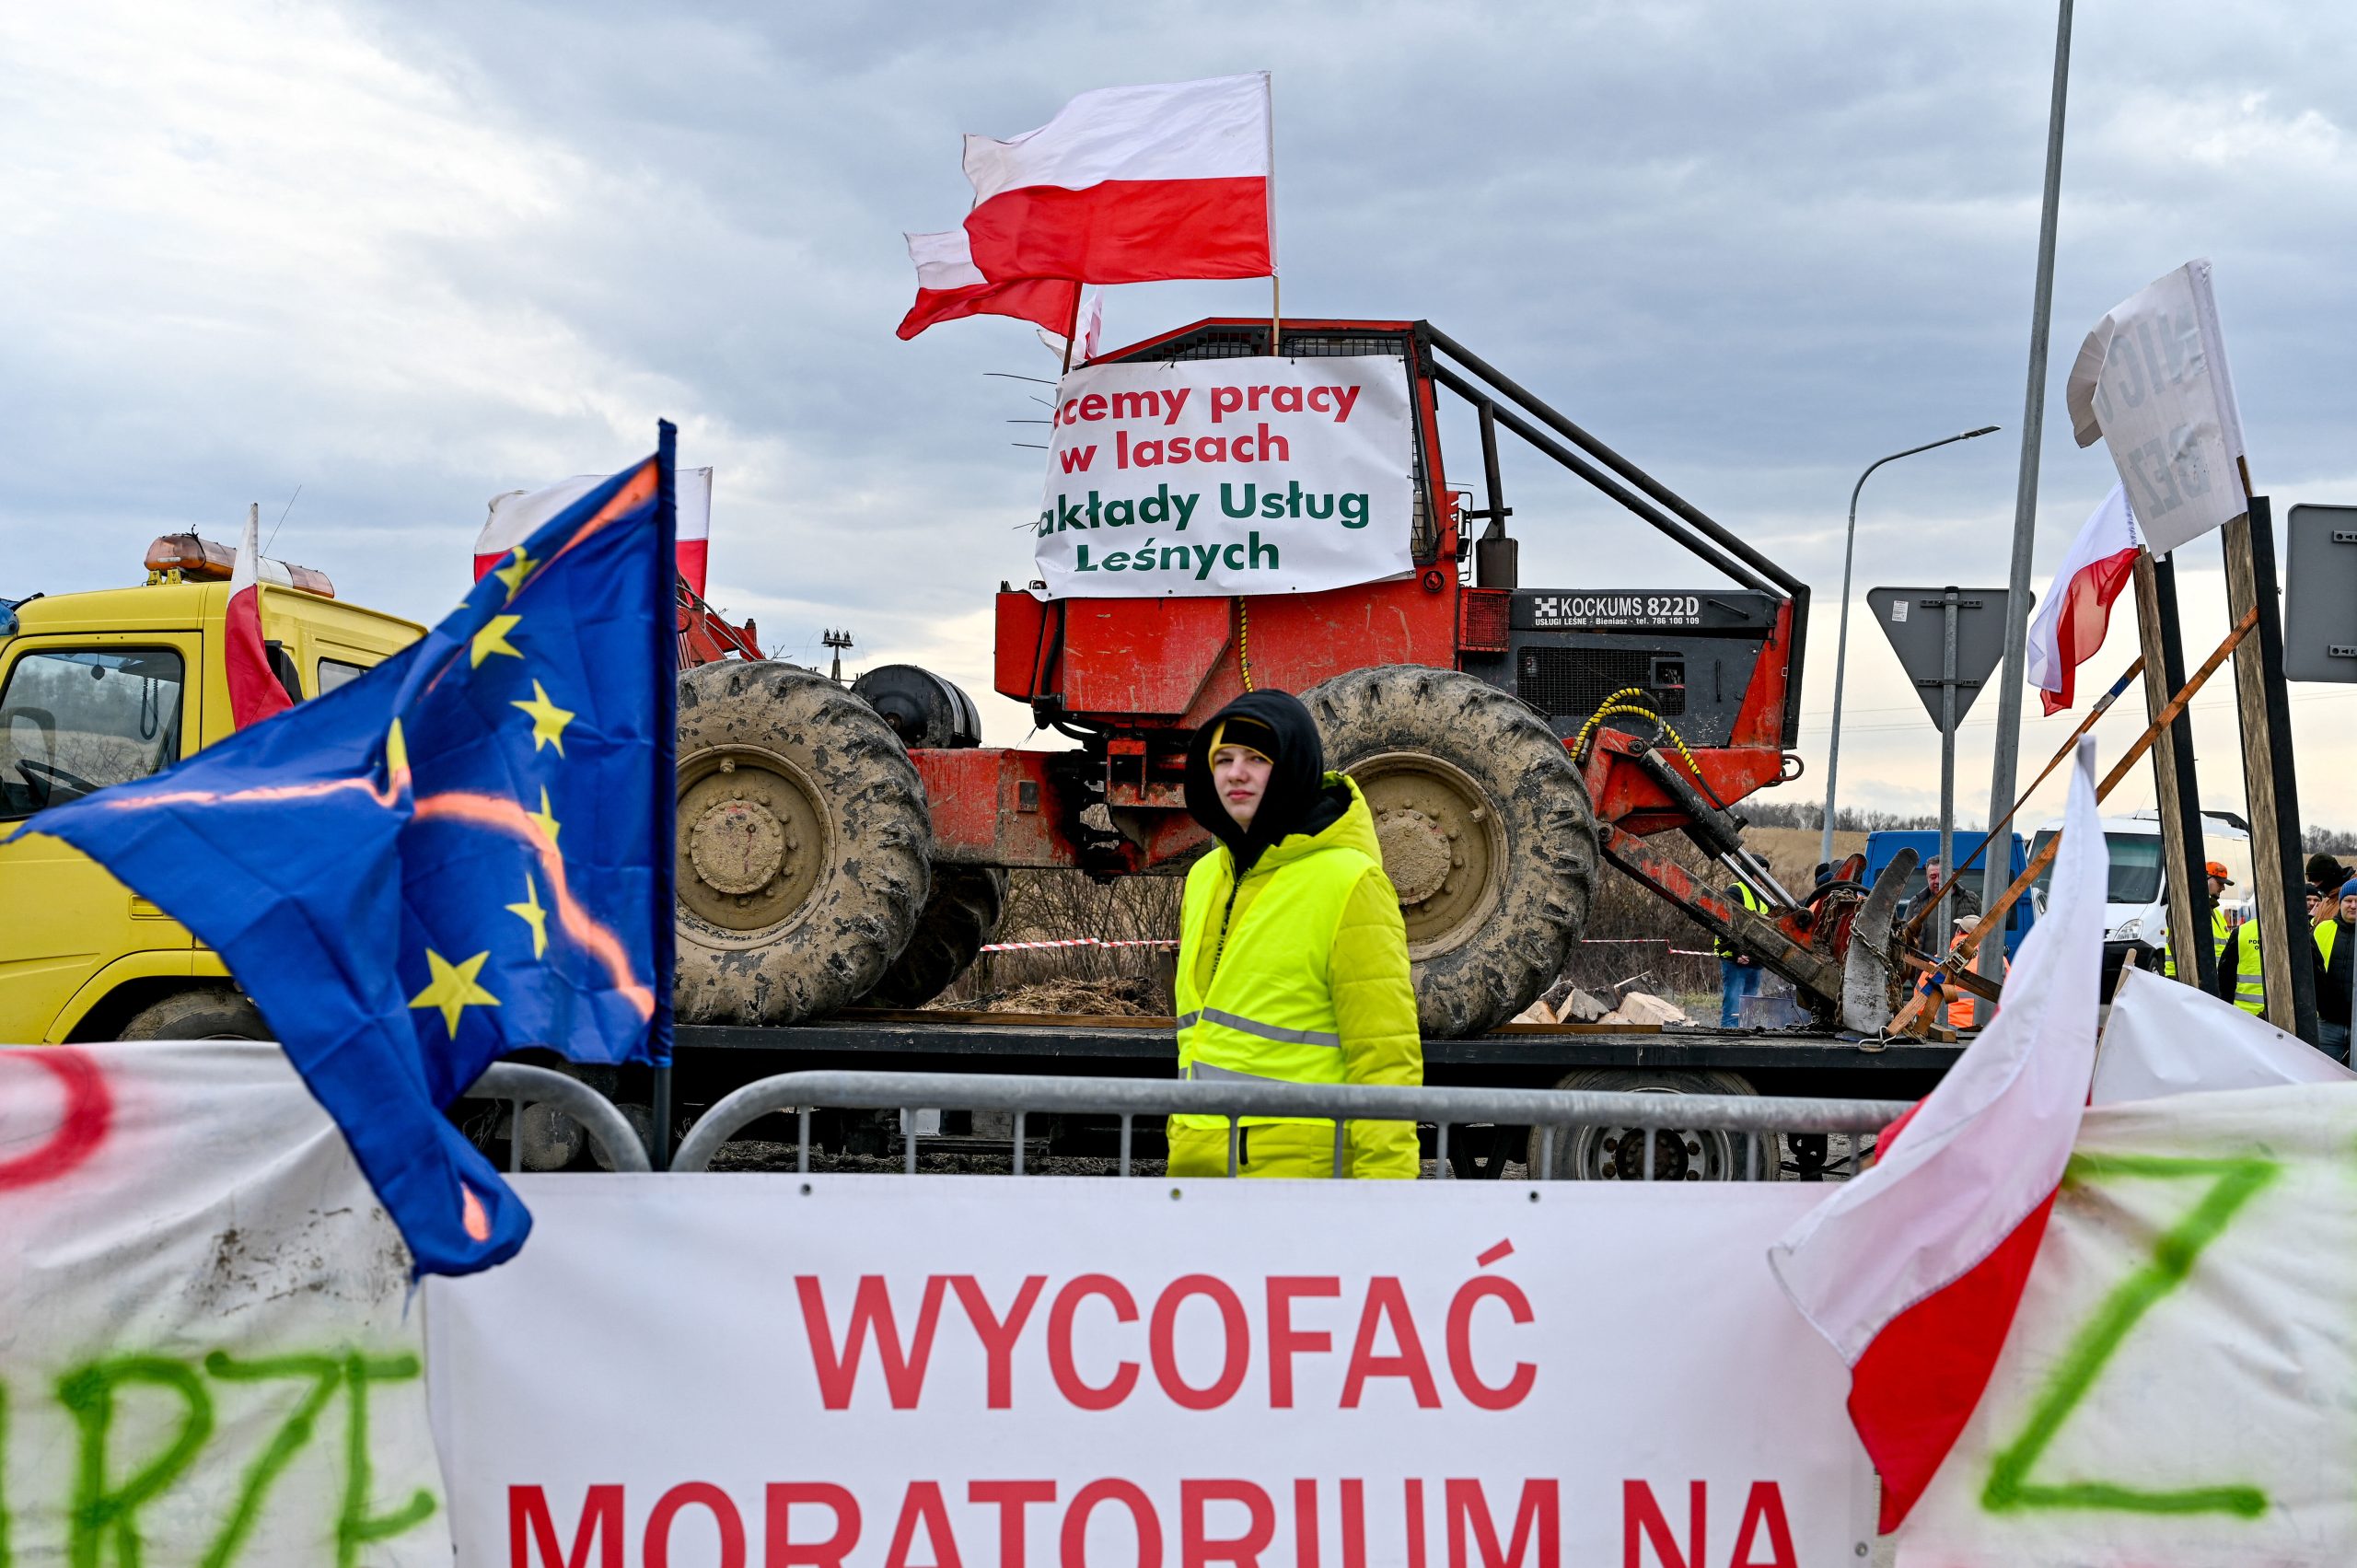 Tailored Russian disinformation targets Polish farmer protests